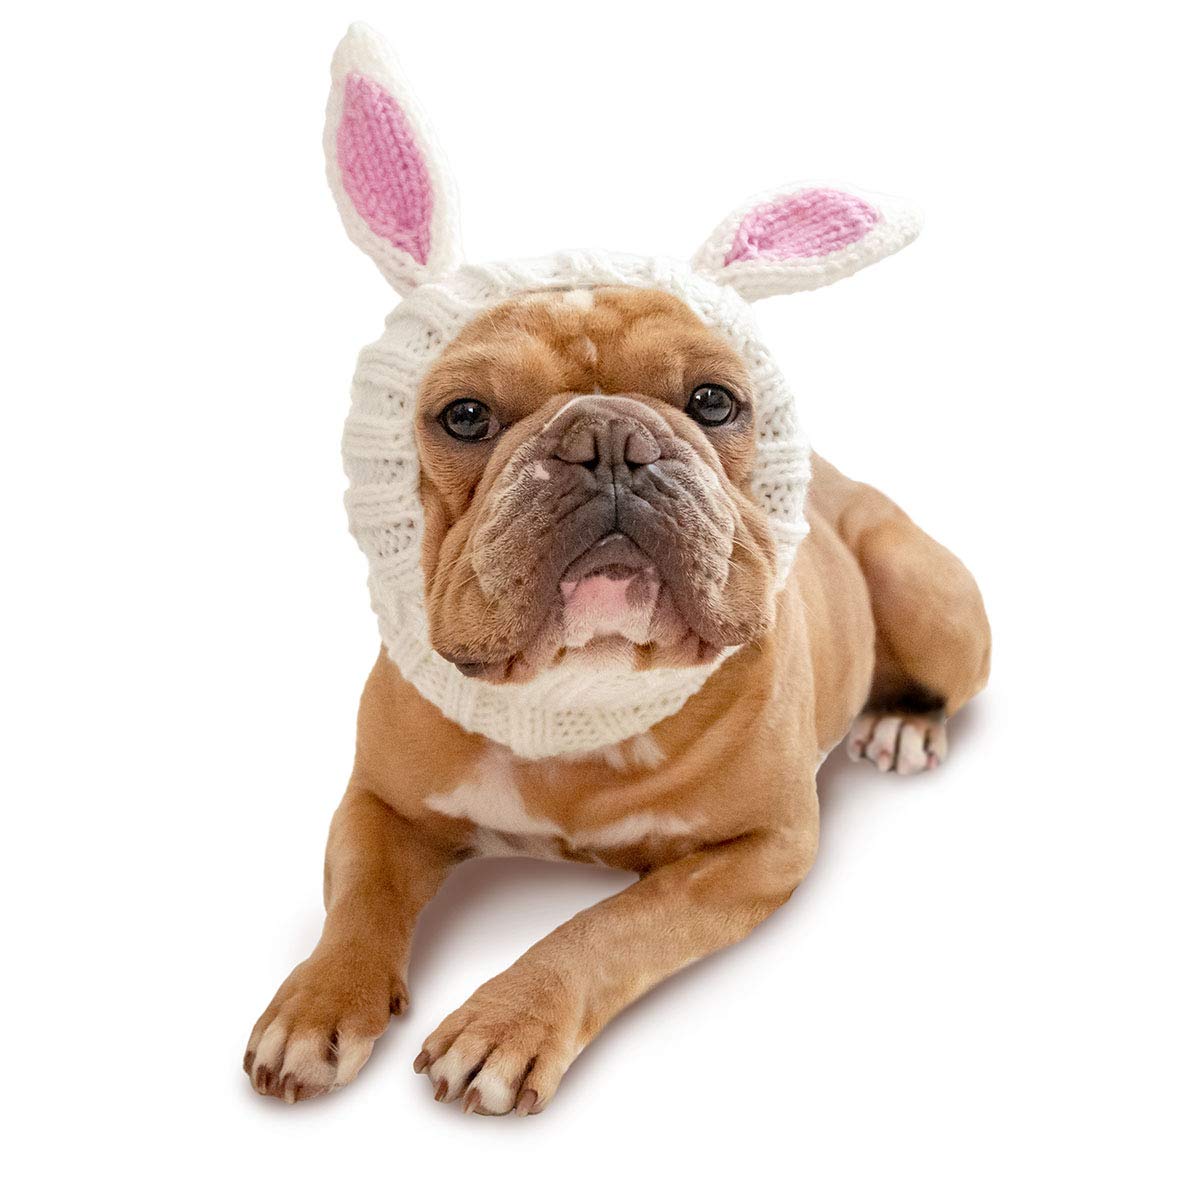 Bunny Costume for Dogs - Large, Soft Yarn Ears